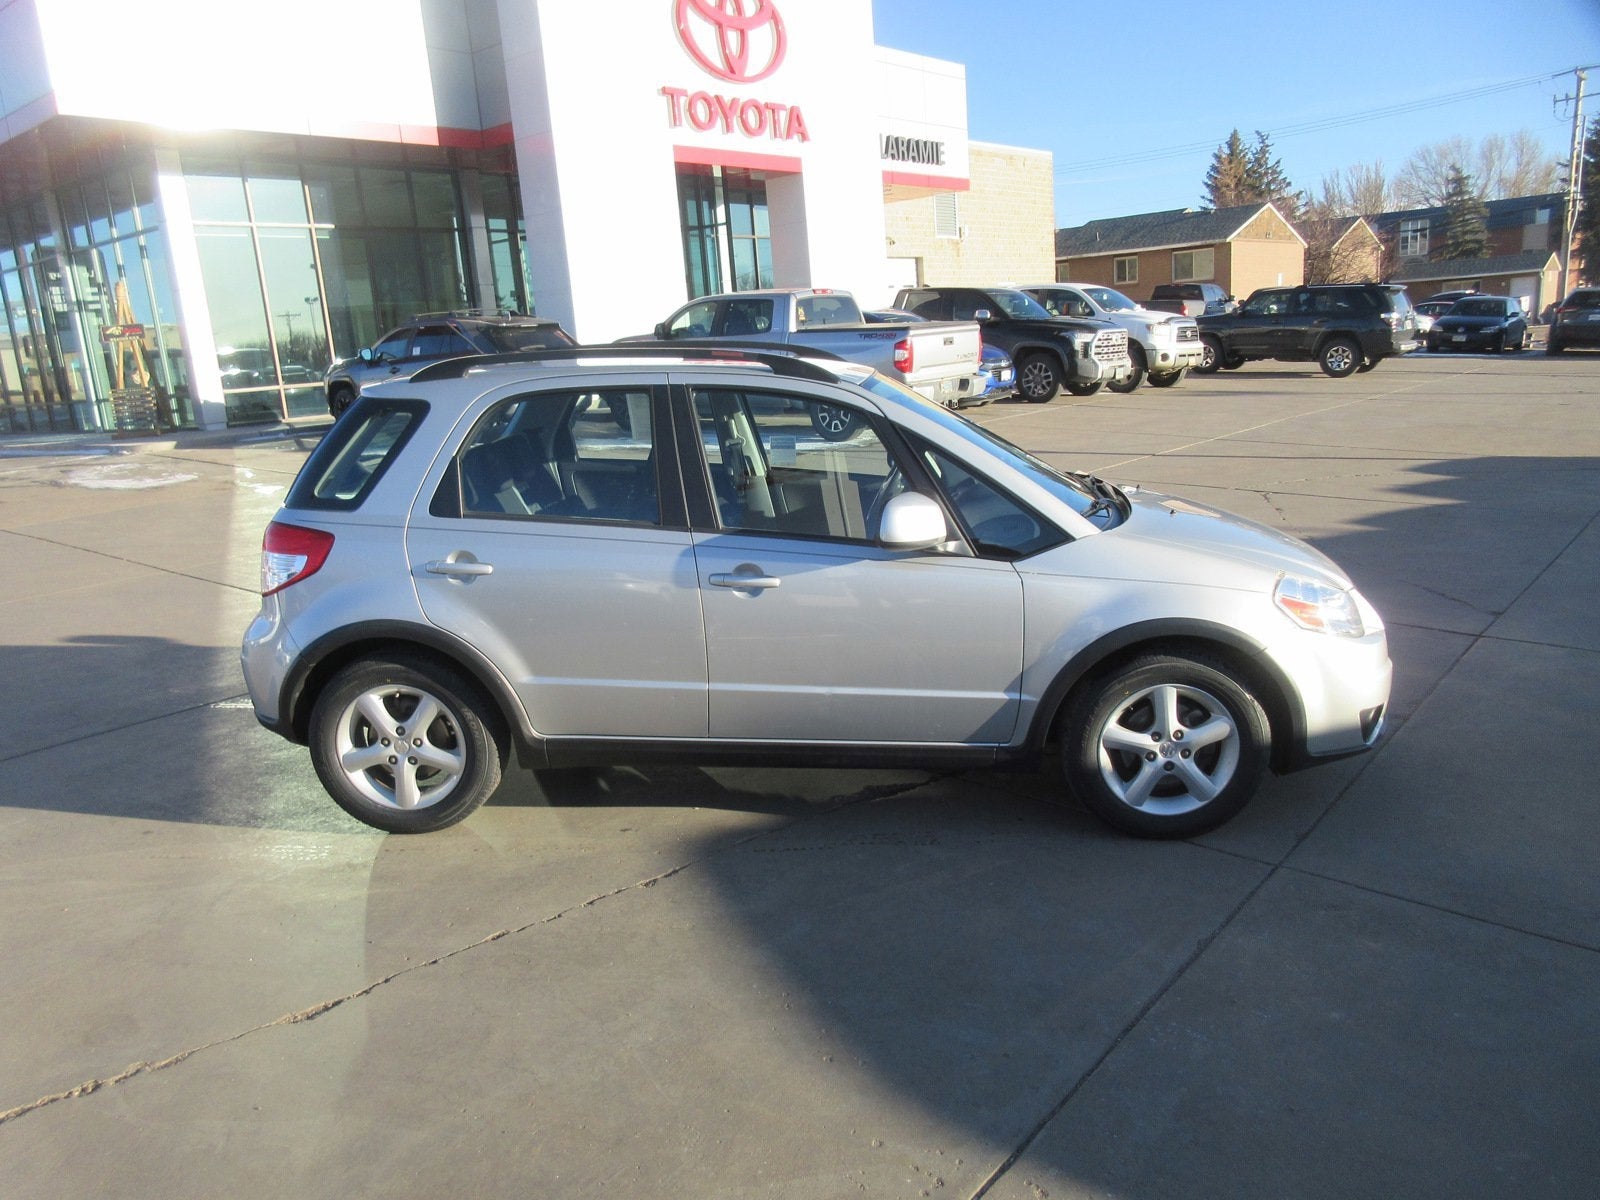 Used 2009 Suzuki SX4 Crossover Technology with VIN JS2YB413995103128 for sale in Laramie, WY